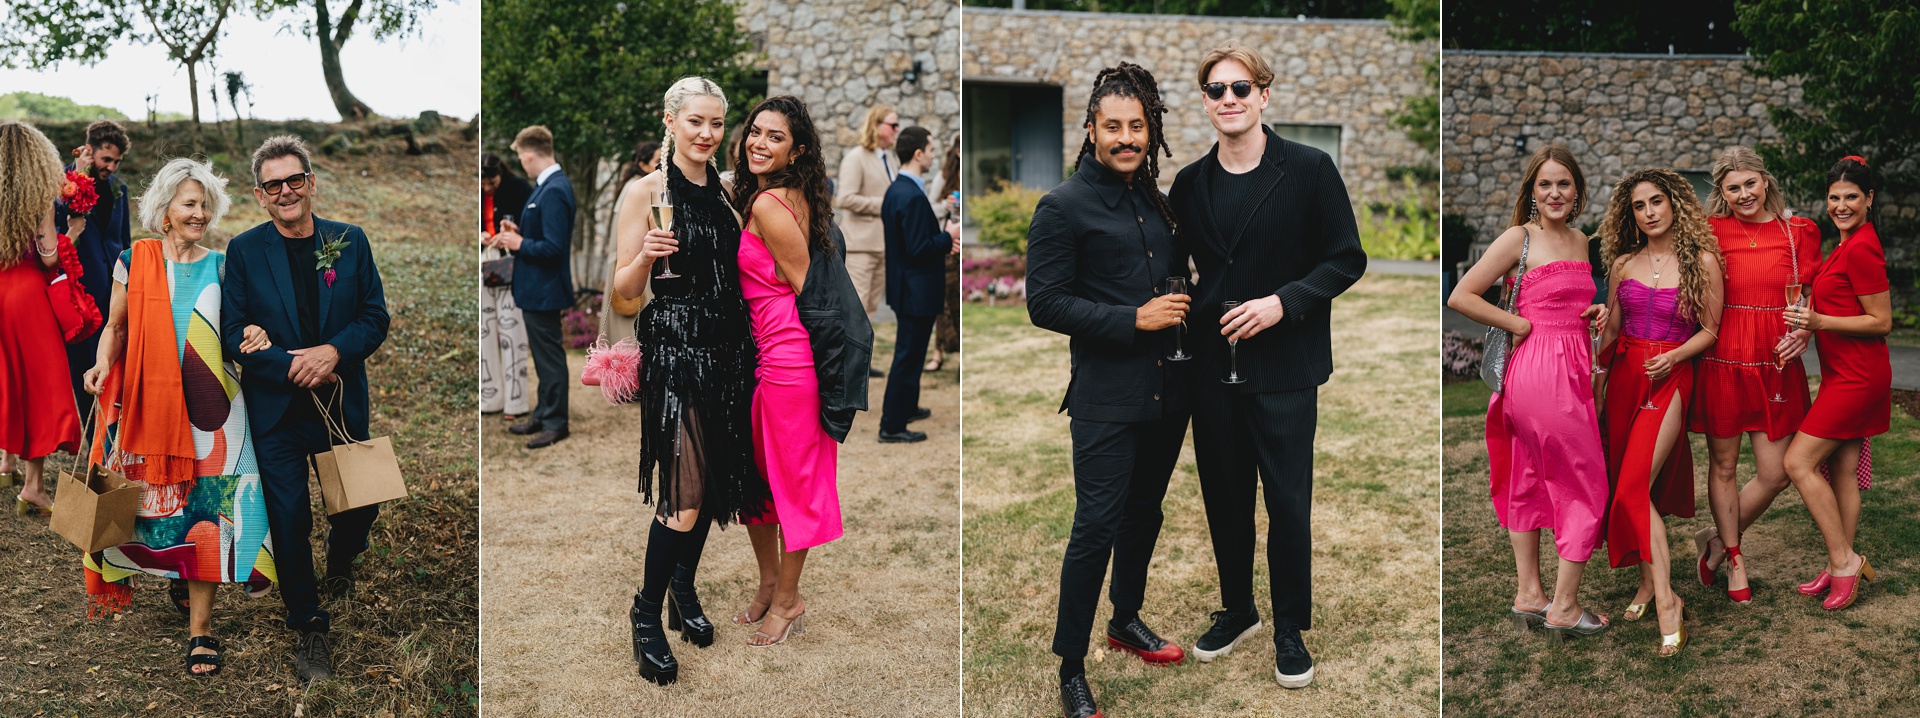 Wedding guests posing in stylish and unusual outfits